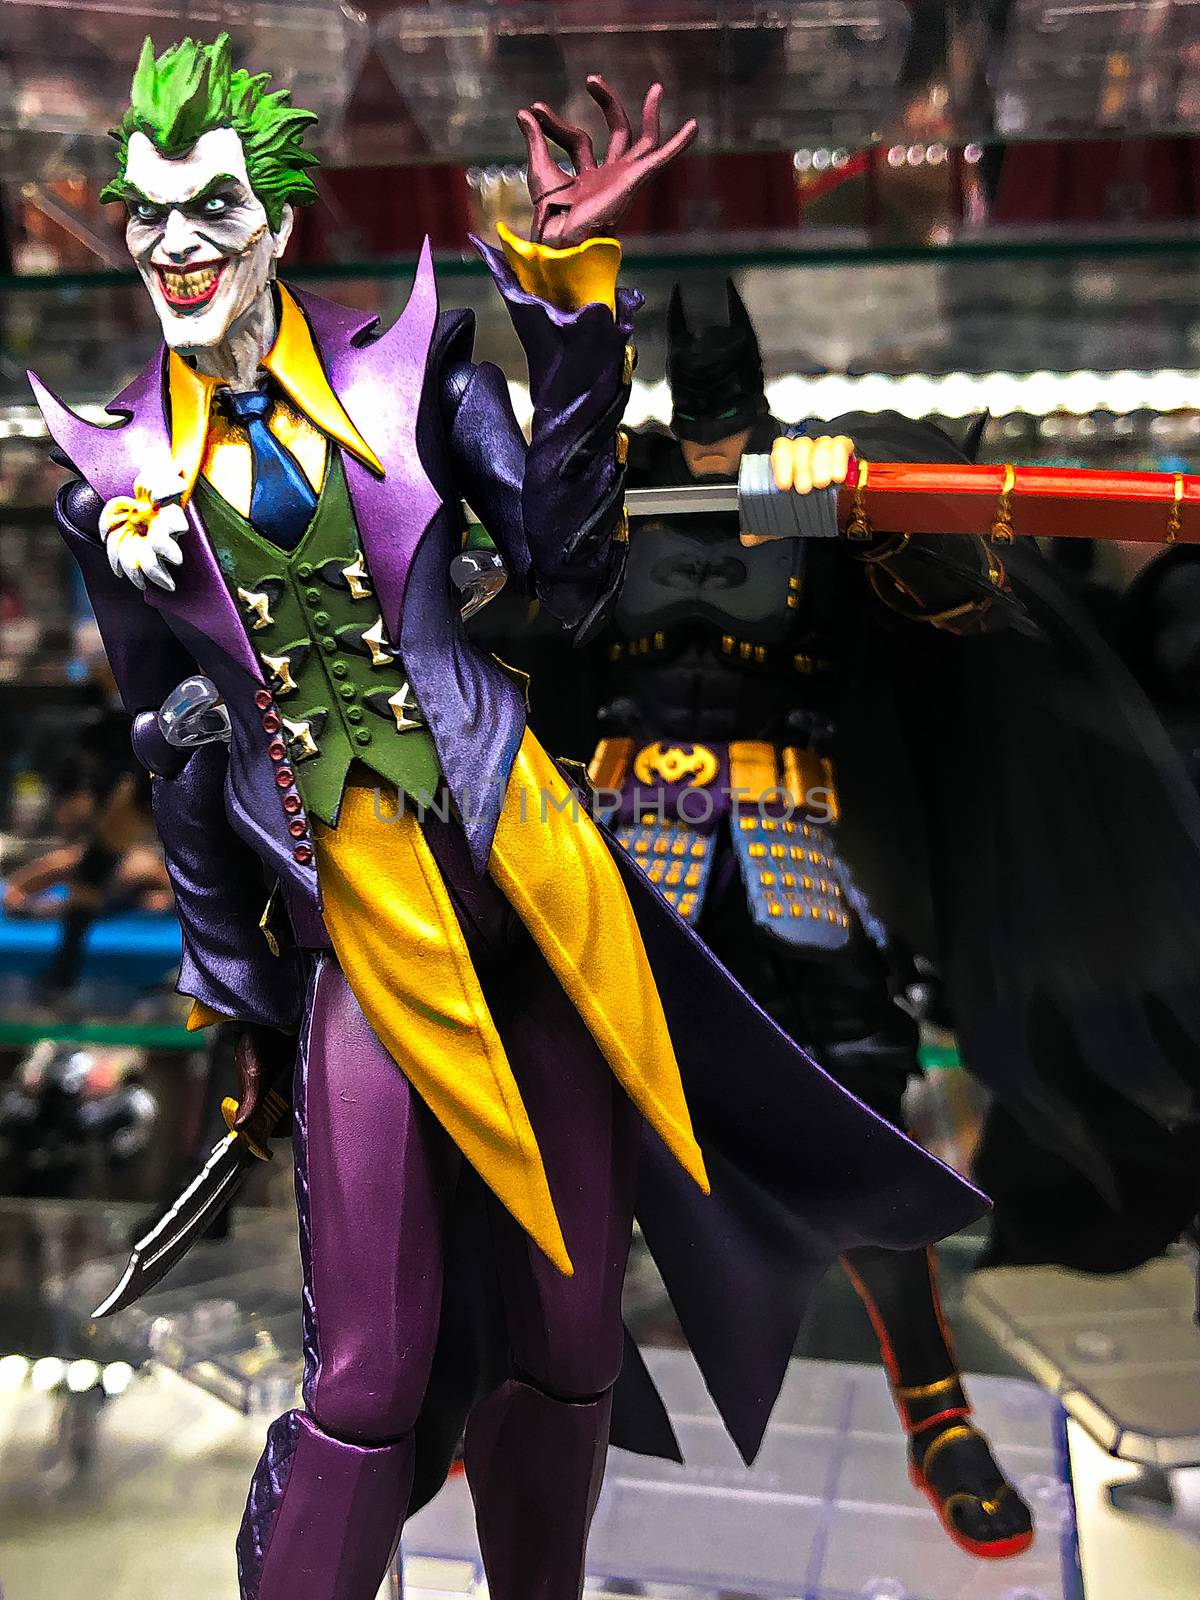 Osaka, Japan - Apr 23, 2019: Focused on fictional character figure from Arkham Asylum Joker figure out of toys shop. by USA-TARO